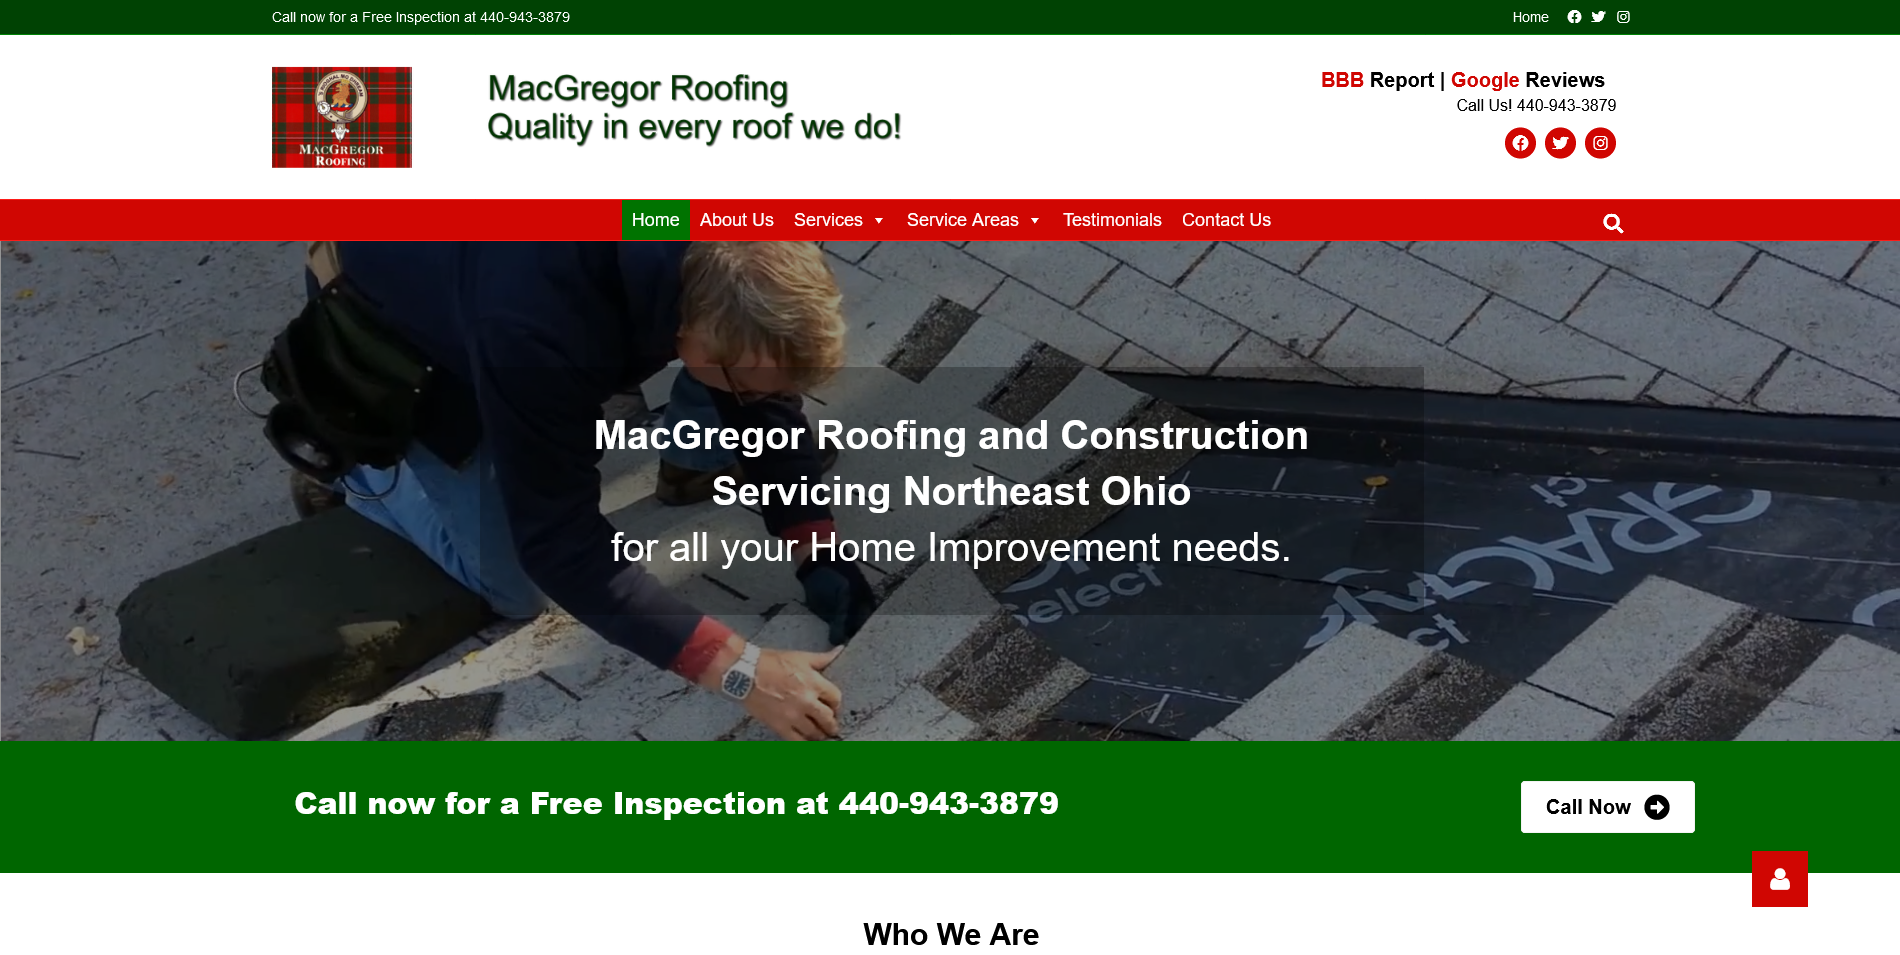 MacGregor Roofing and Construction